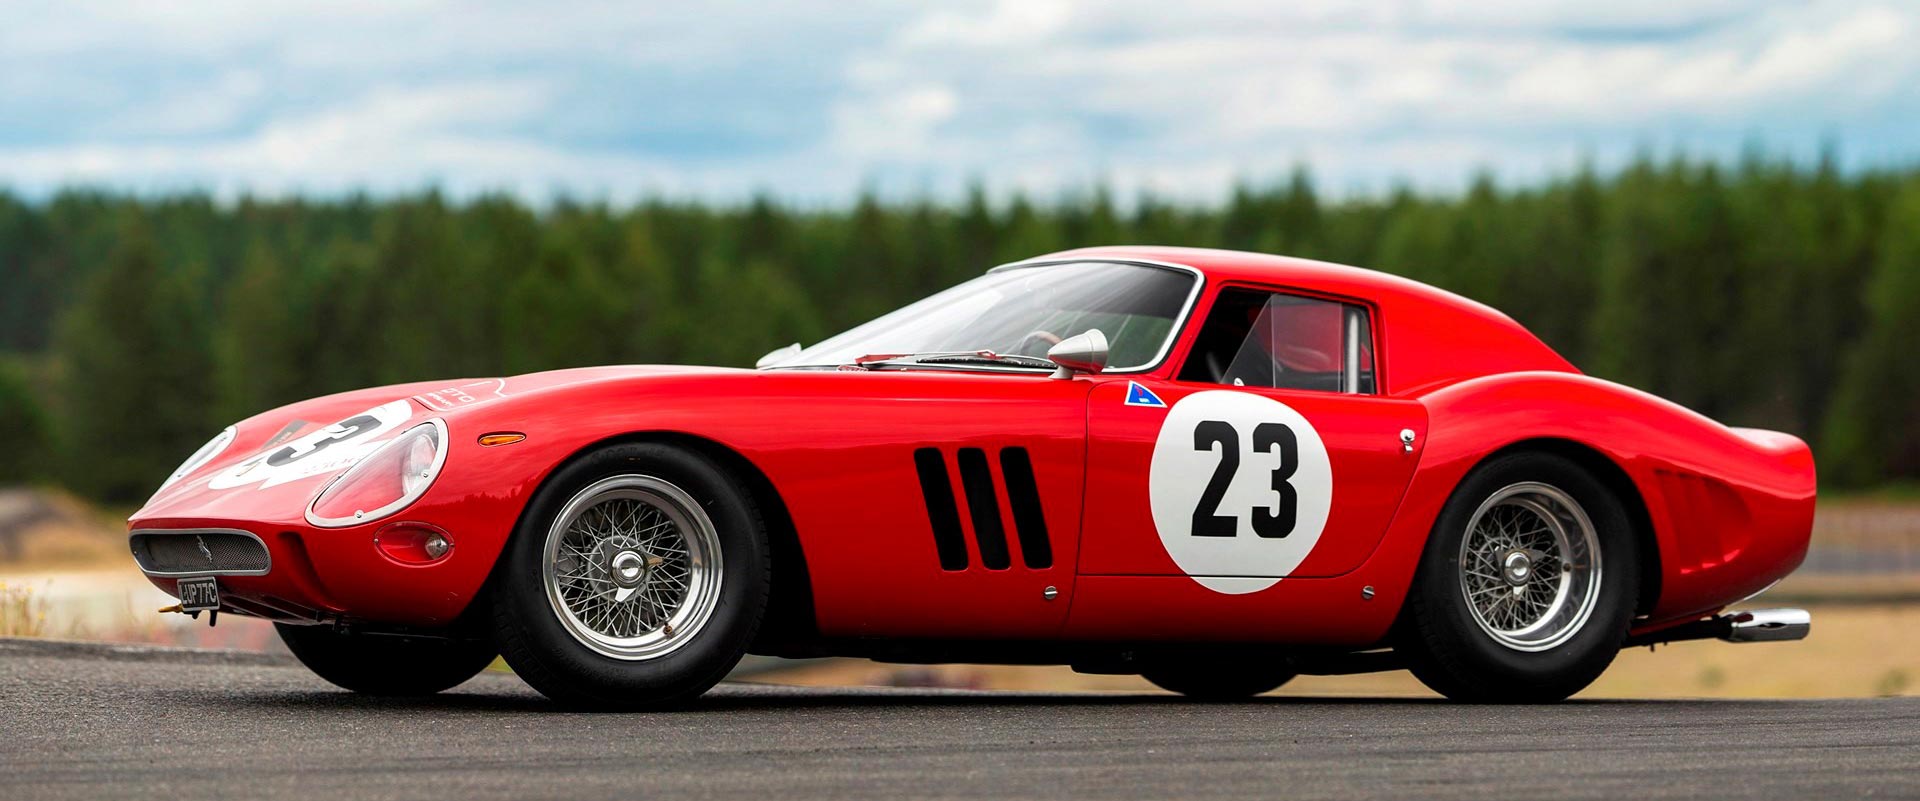 The most expensive car ever? 1962 Ferrari 250 GTO: The 1962 Ferrari 250 GTO to be auctioned by RM Sotheby